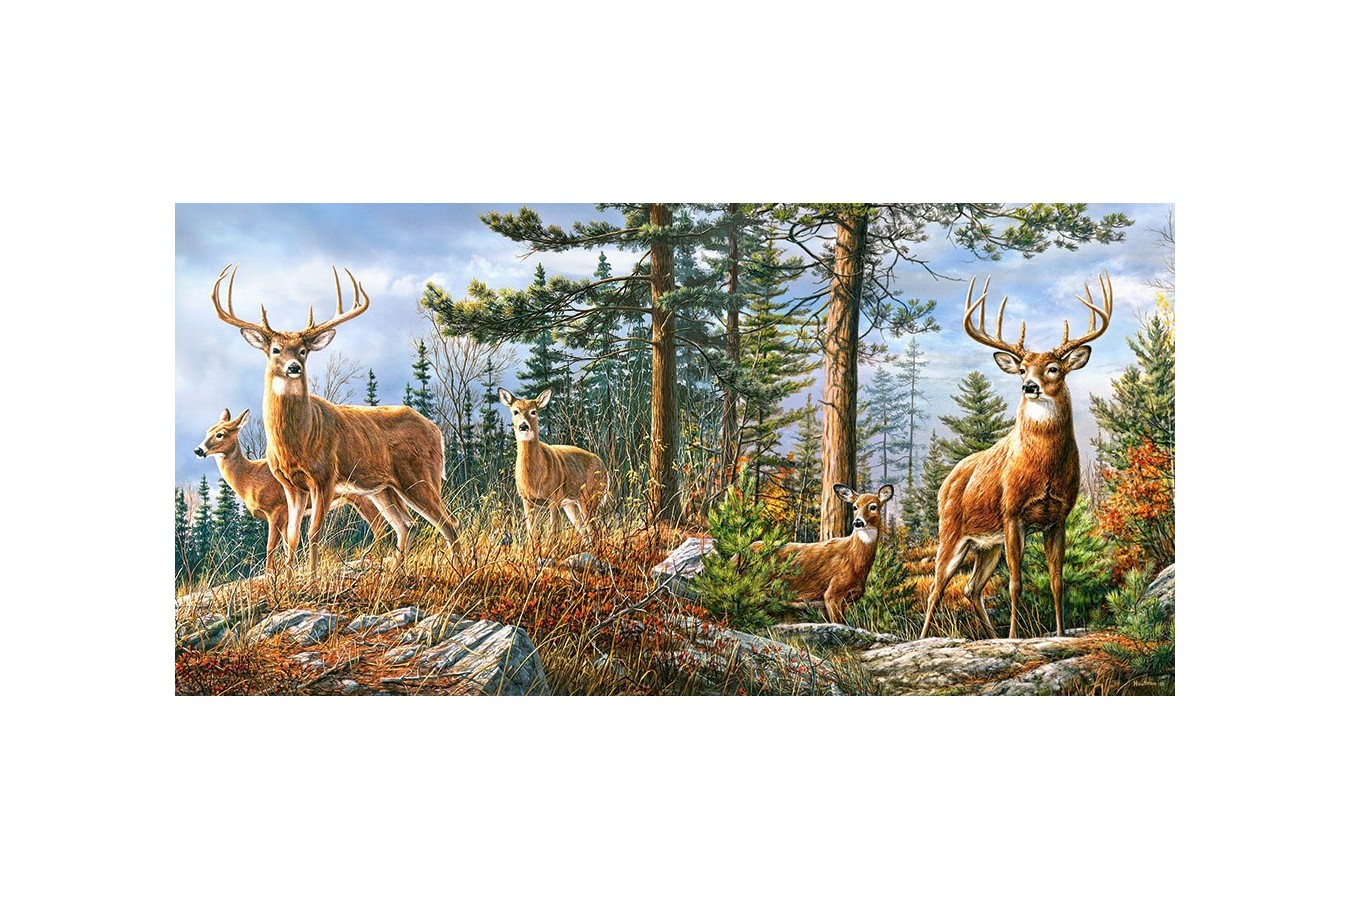 Puzzle 4000 piese - Royal Deer Family (Castorland-400317)